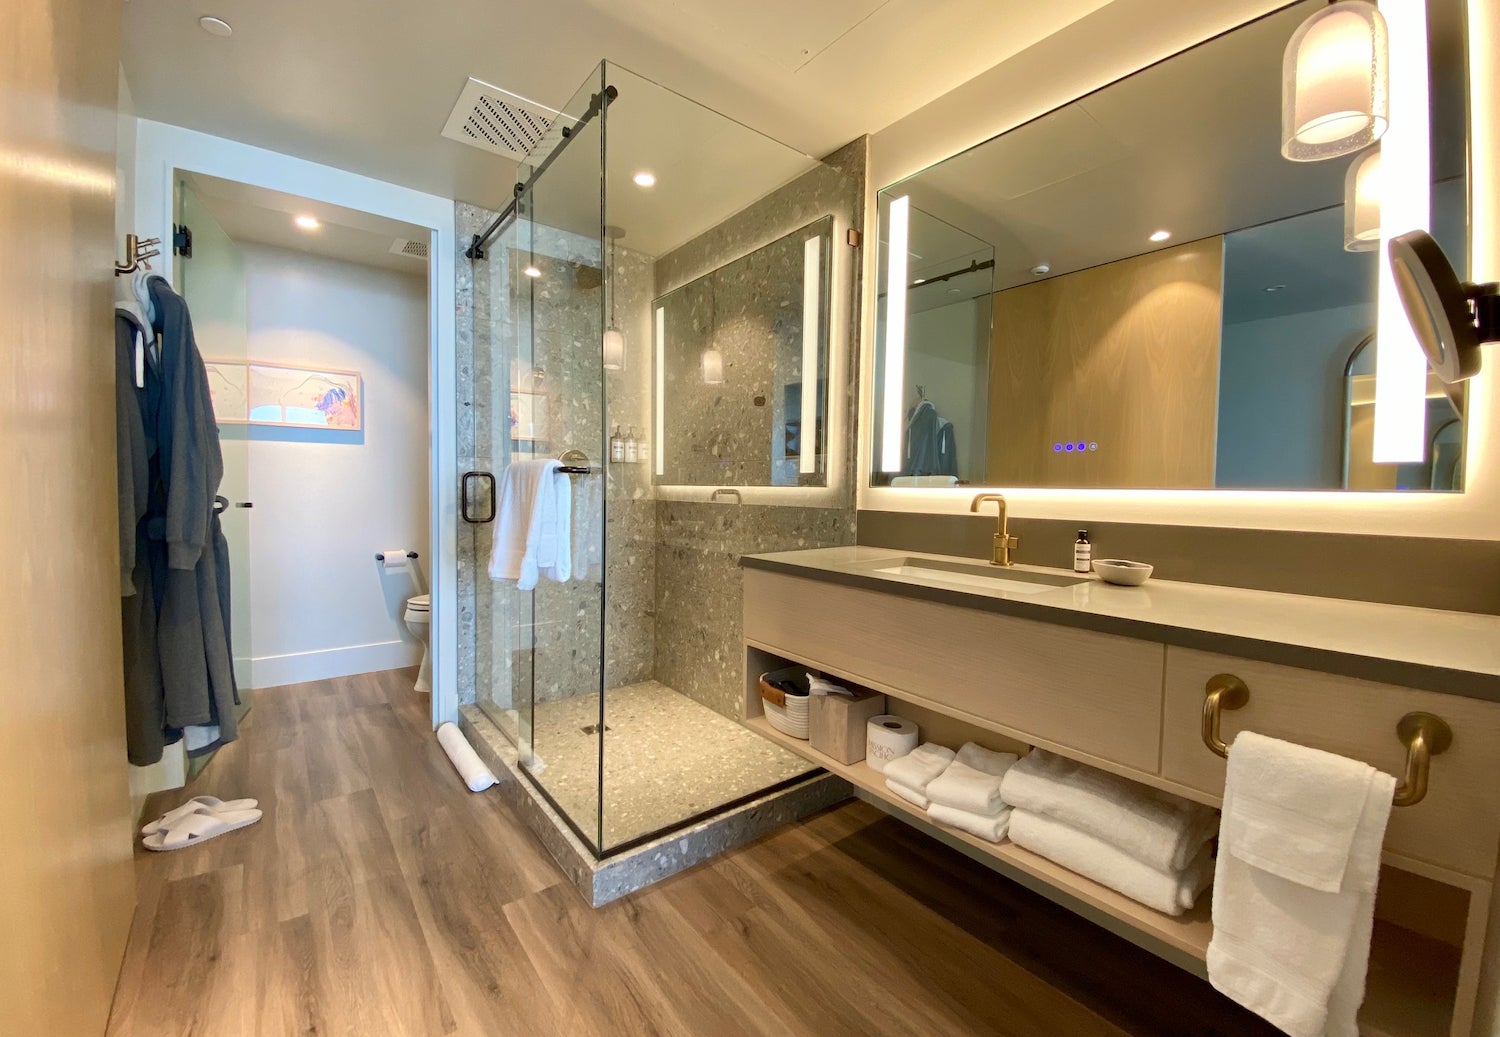 Hotel bathroom with a vanity next to a glassdoor shower